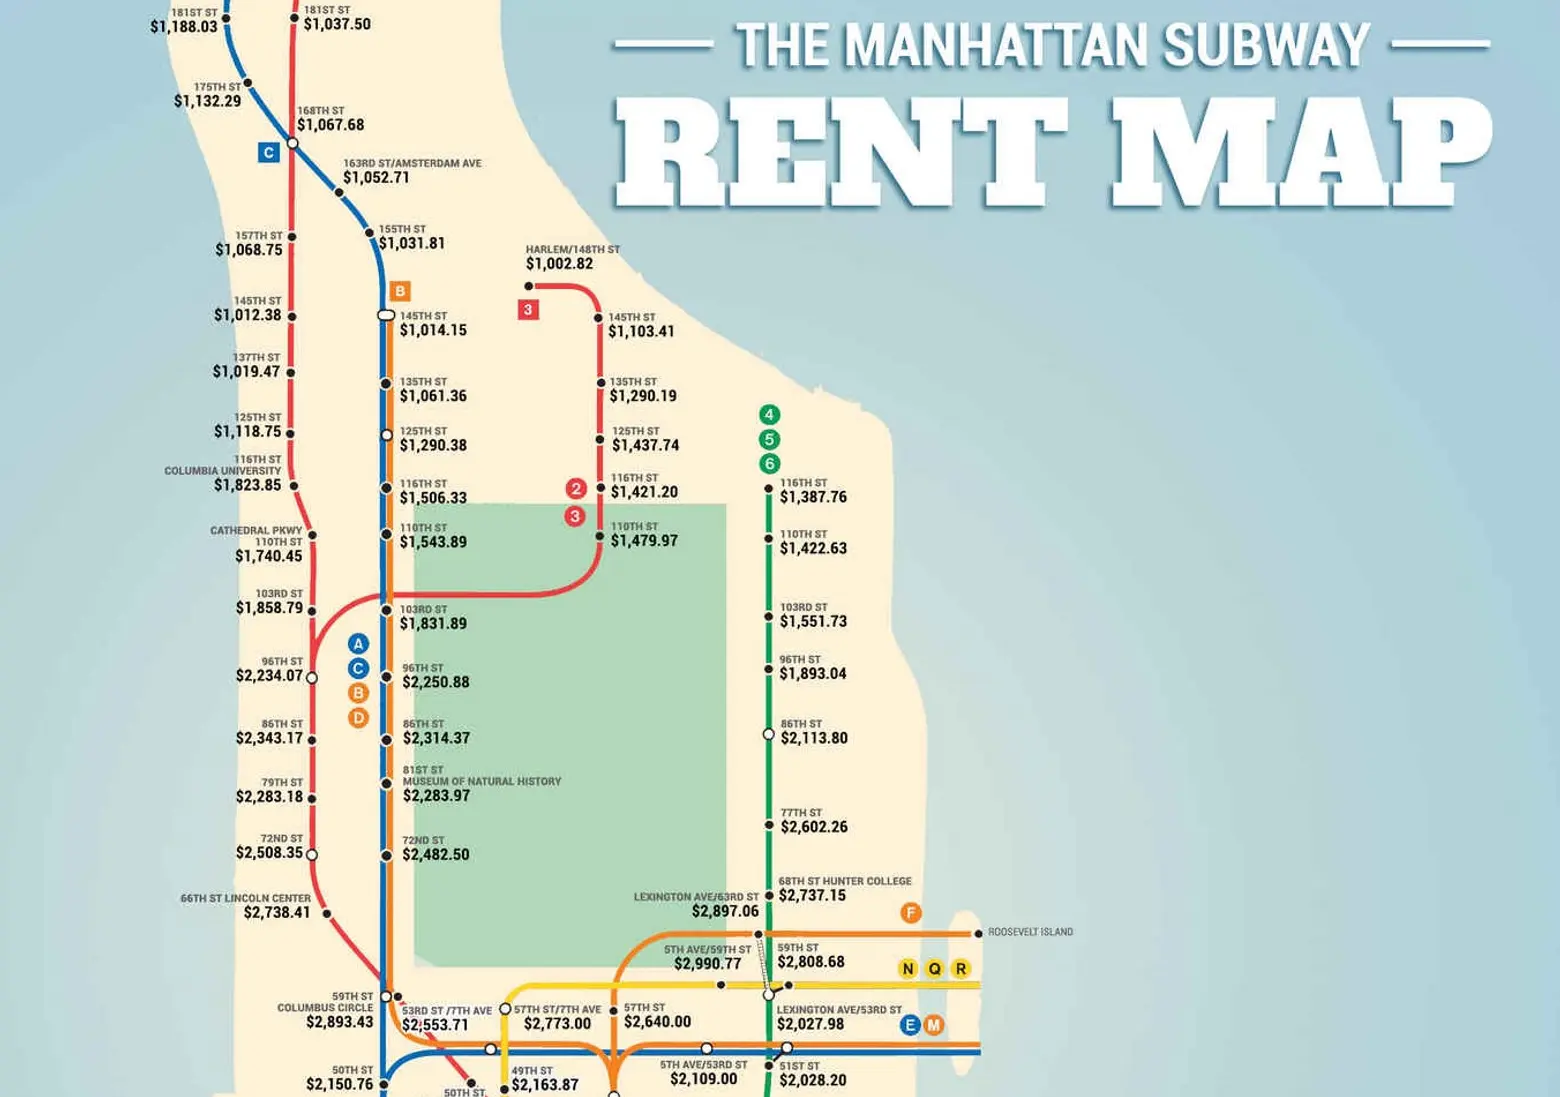 Report: Subway exploring sale with possible value over $10 million